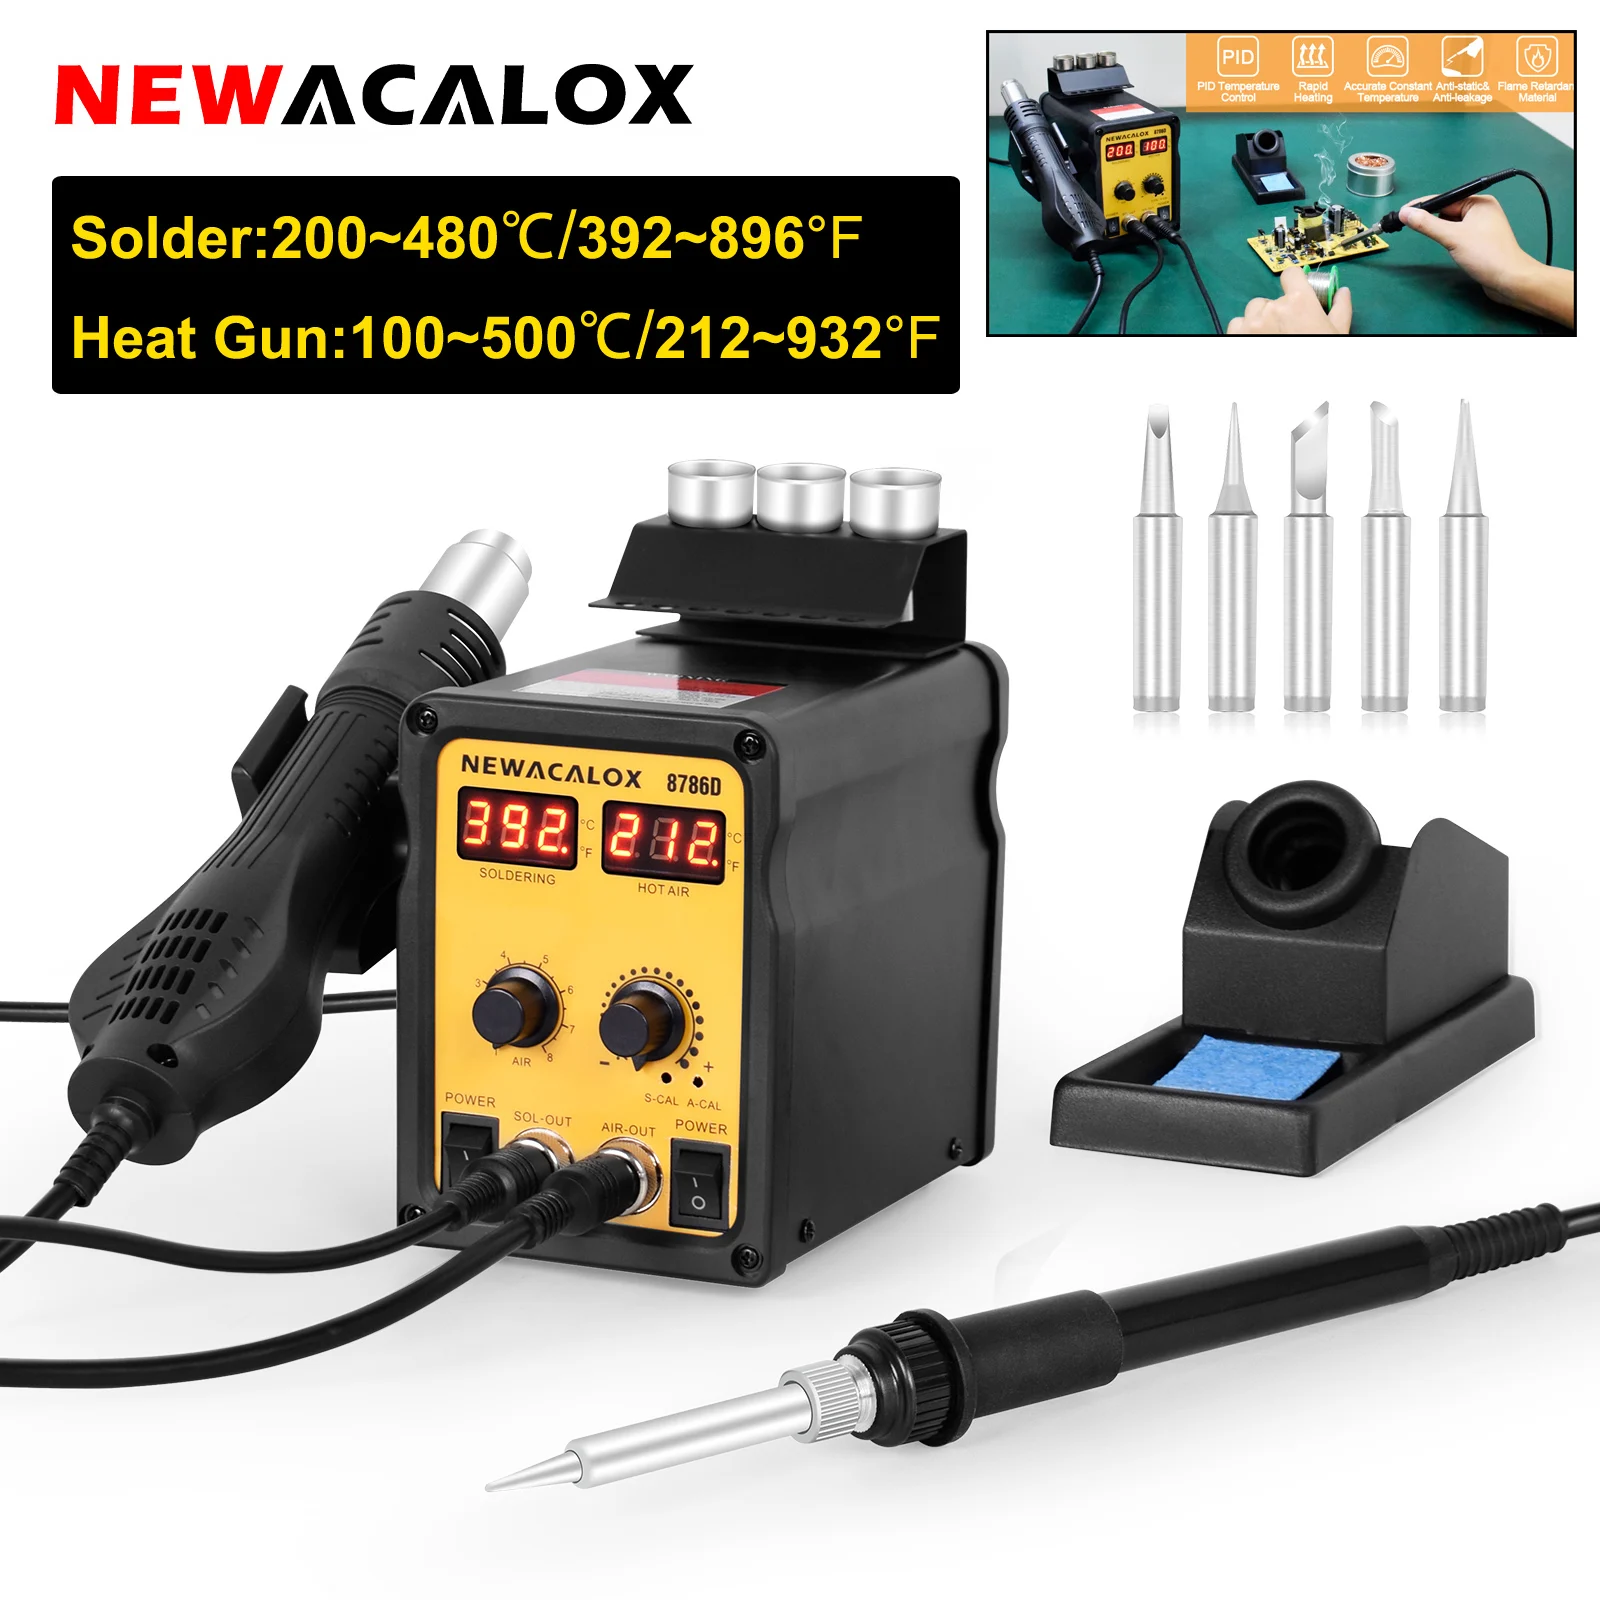 NEWACALOX 2-in-1 Digital Soldering Station Soldering Iron Hot Air Rework Station for PCB SOIC SMD BGA Welding Repair Tools